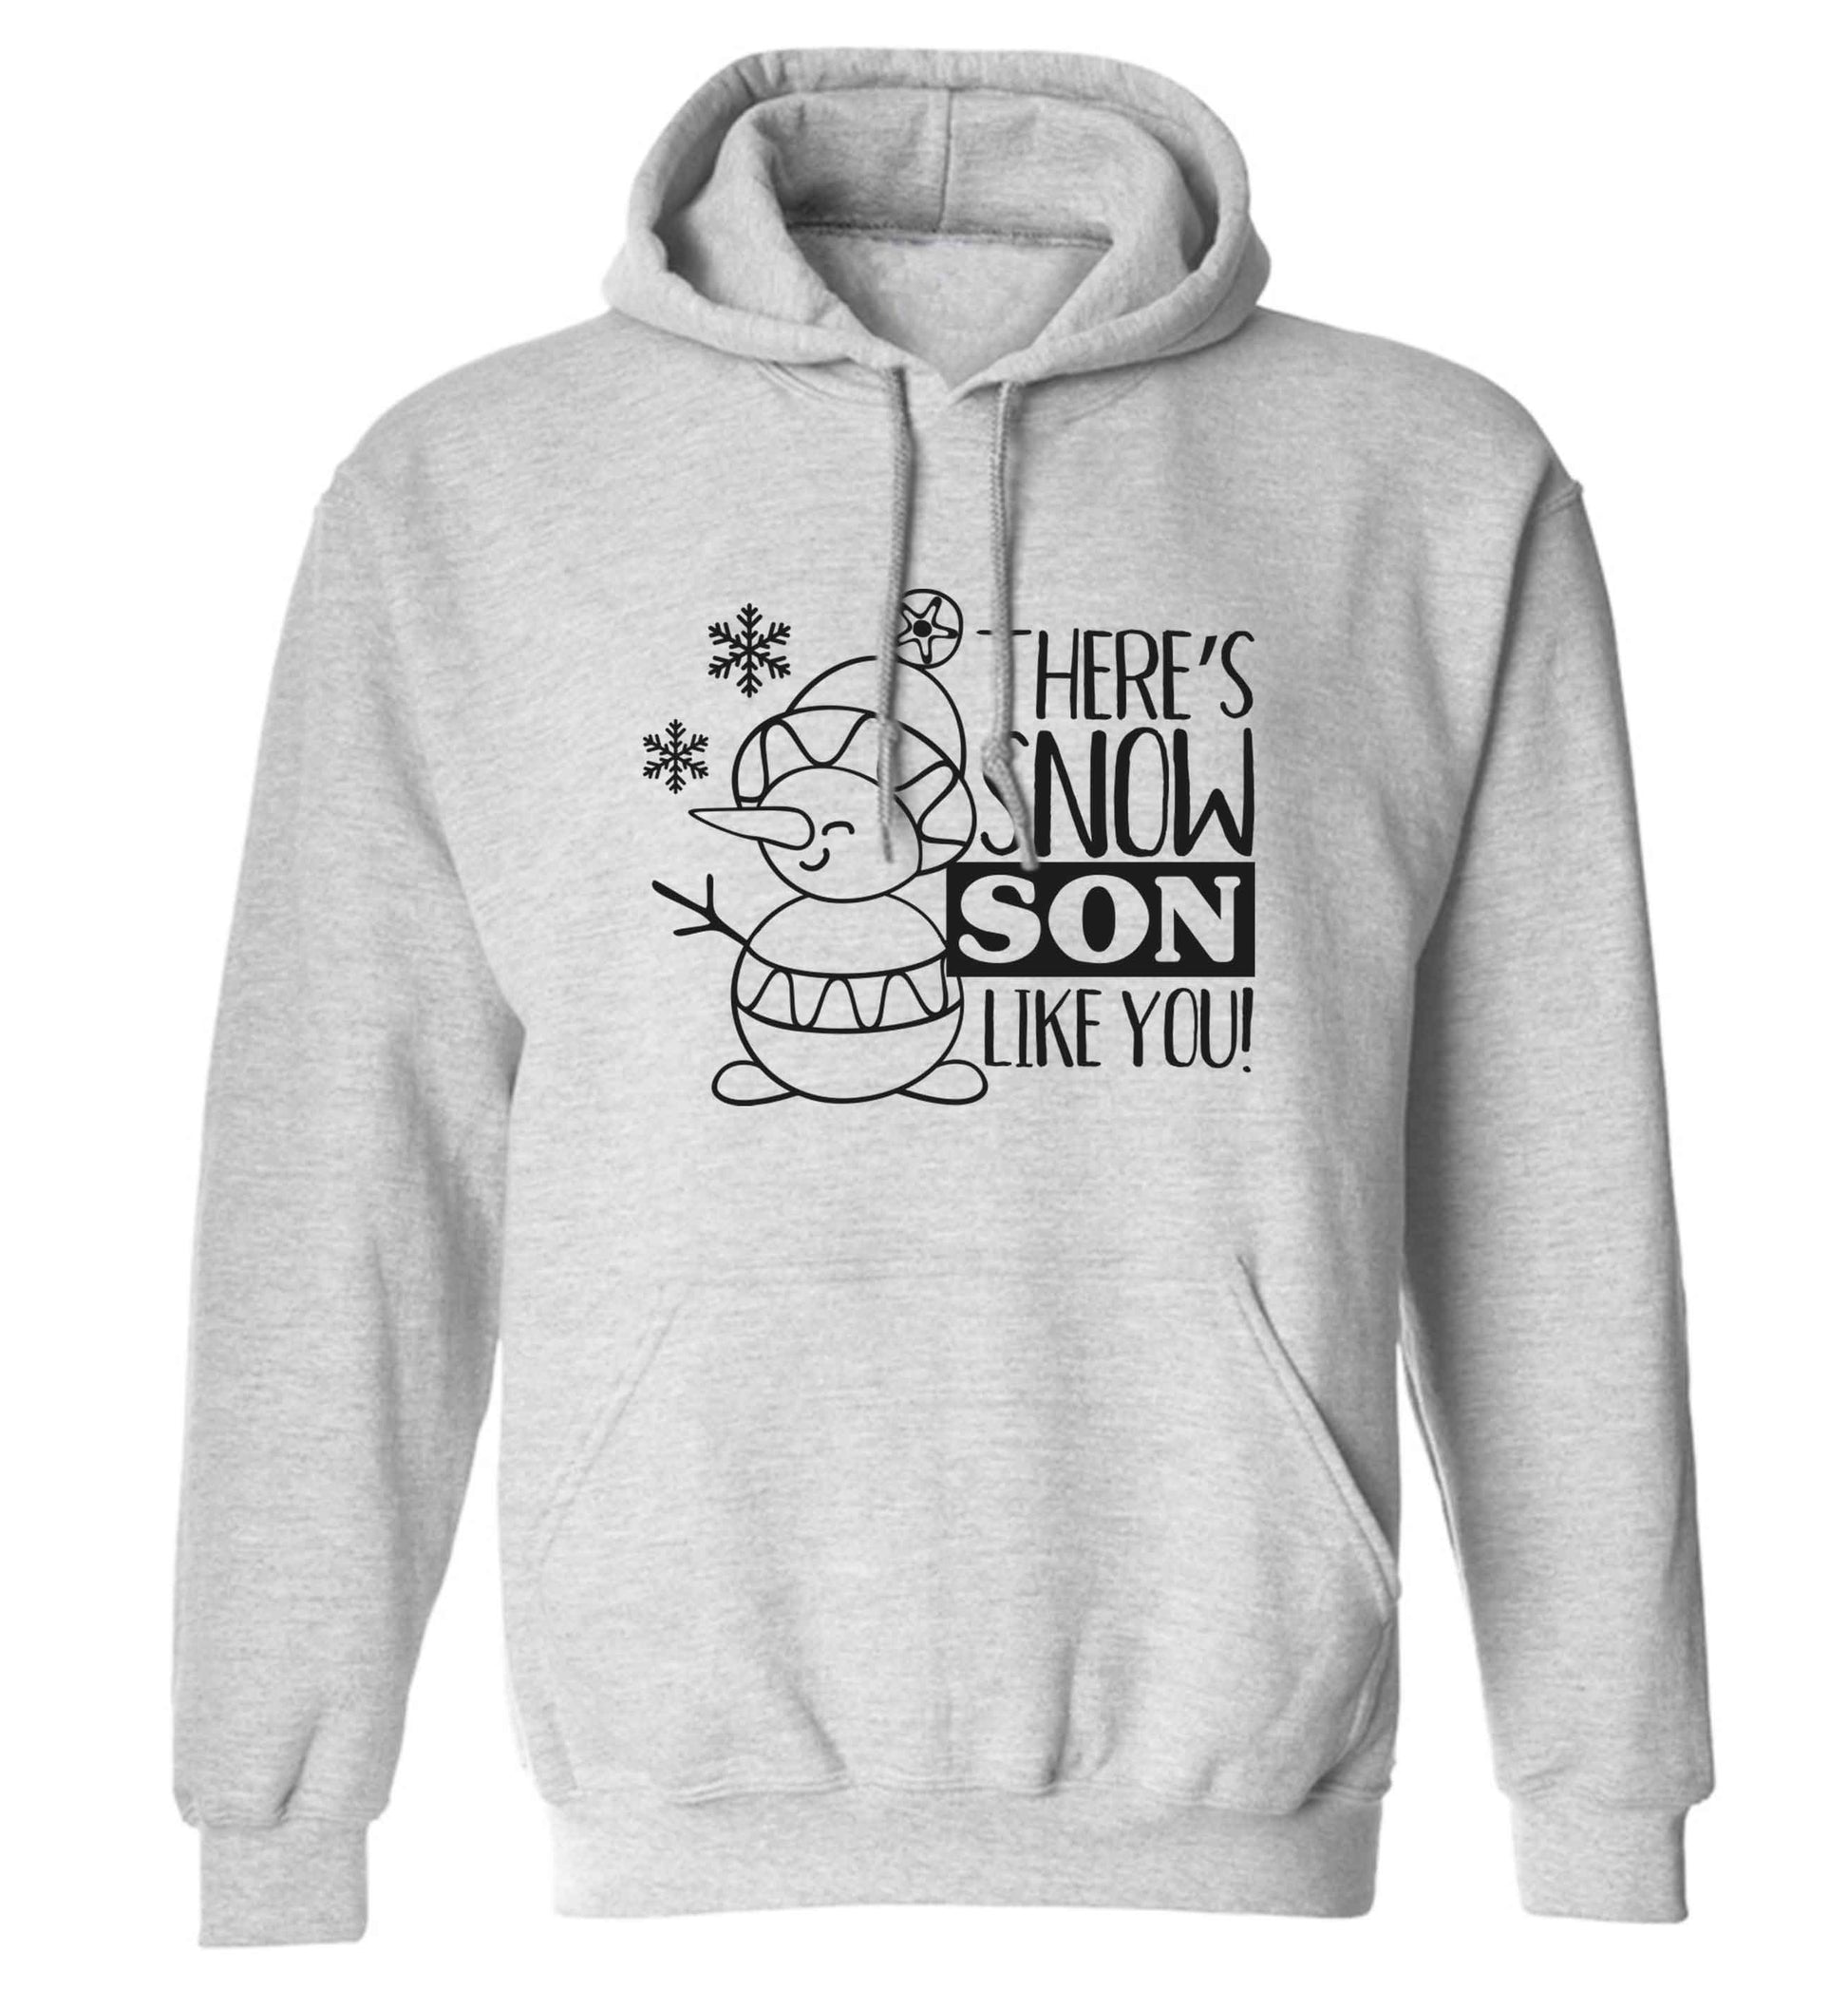 There's snow son like you adults unisex grey hoodie 2XL